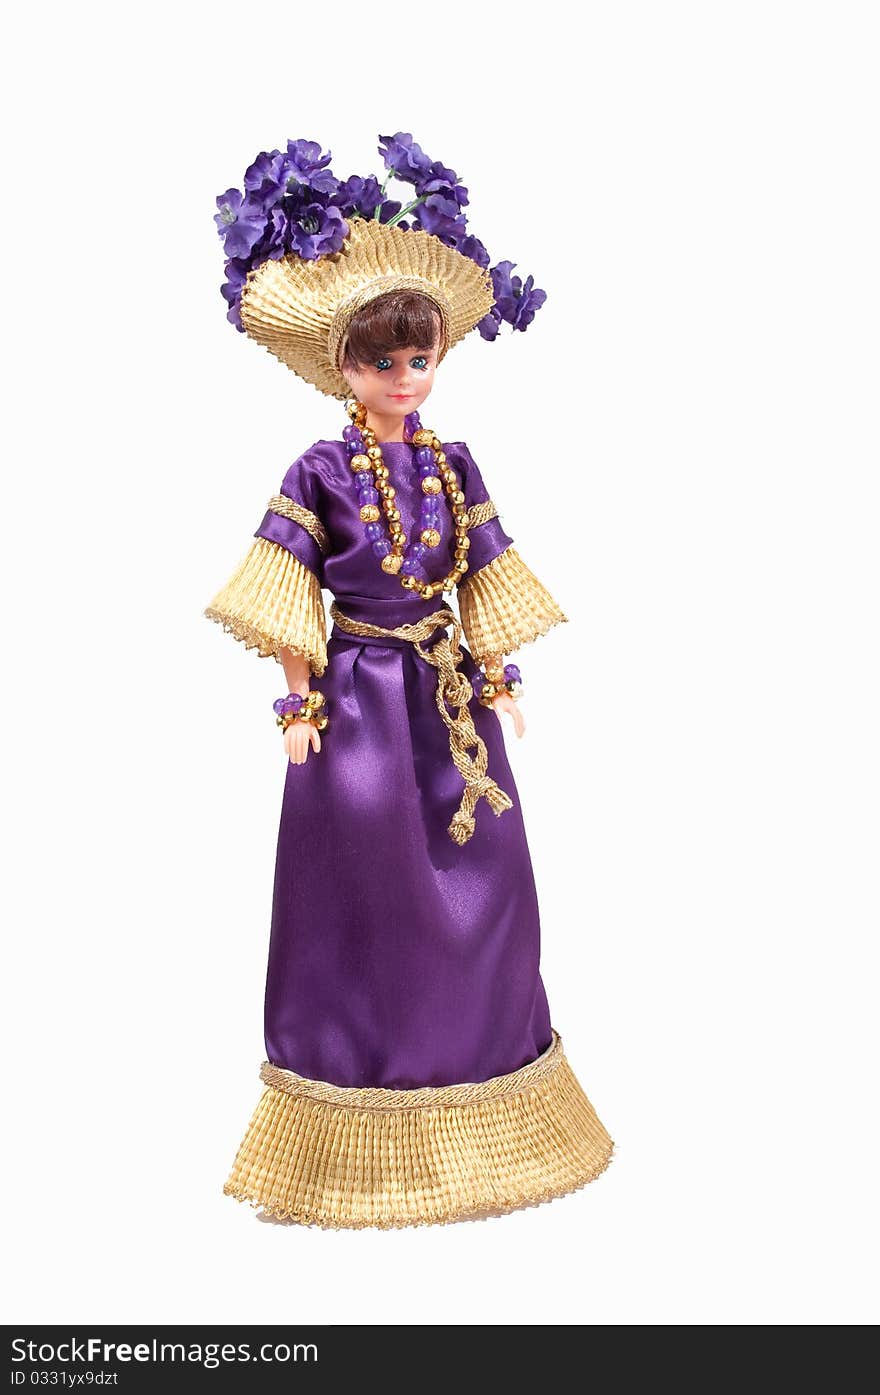 Girl's doll wearing handmade dress and hat. She wears a purple dress with gold trim and a gold hat with purple flowers. Girl's doll wearing handmade dress and hat. She wears a purple dress with gold trim and a gold hat with purple flowers.